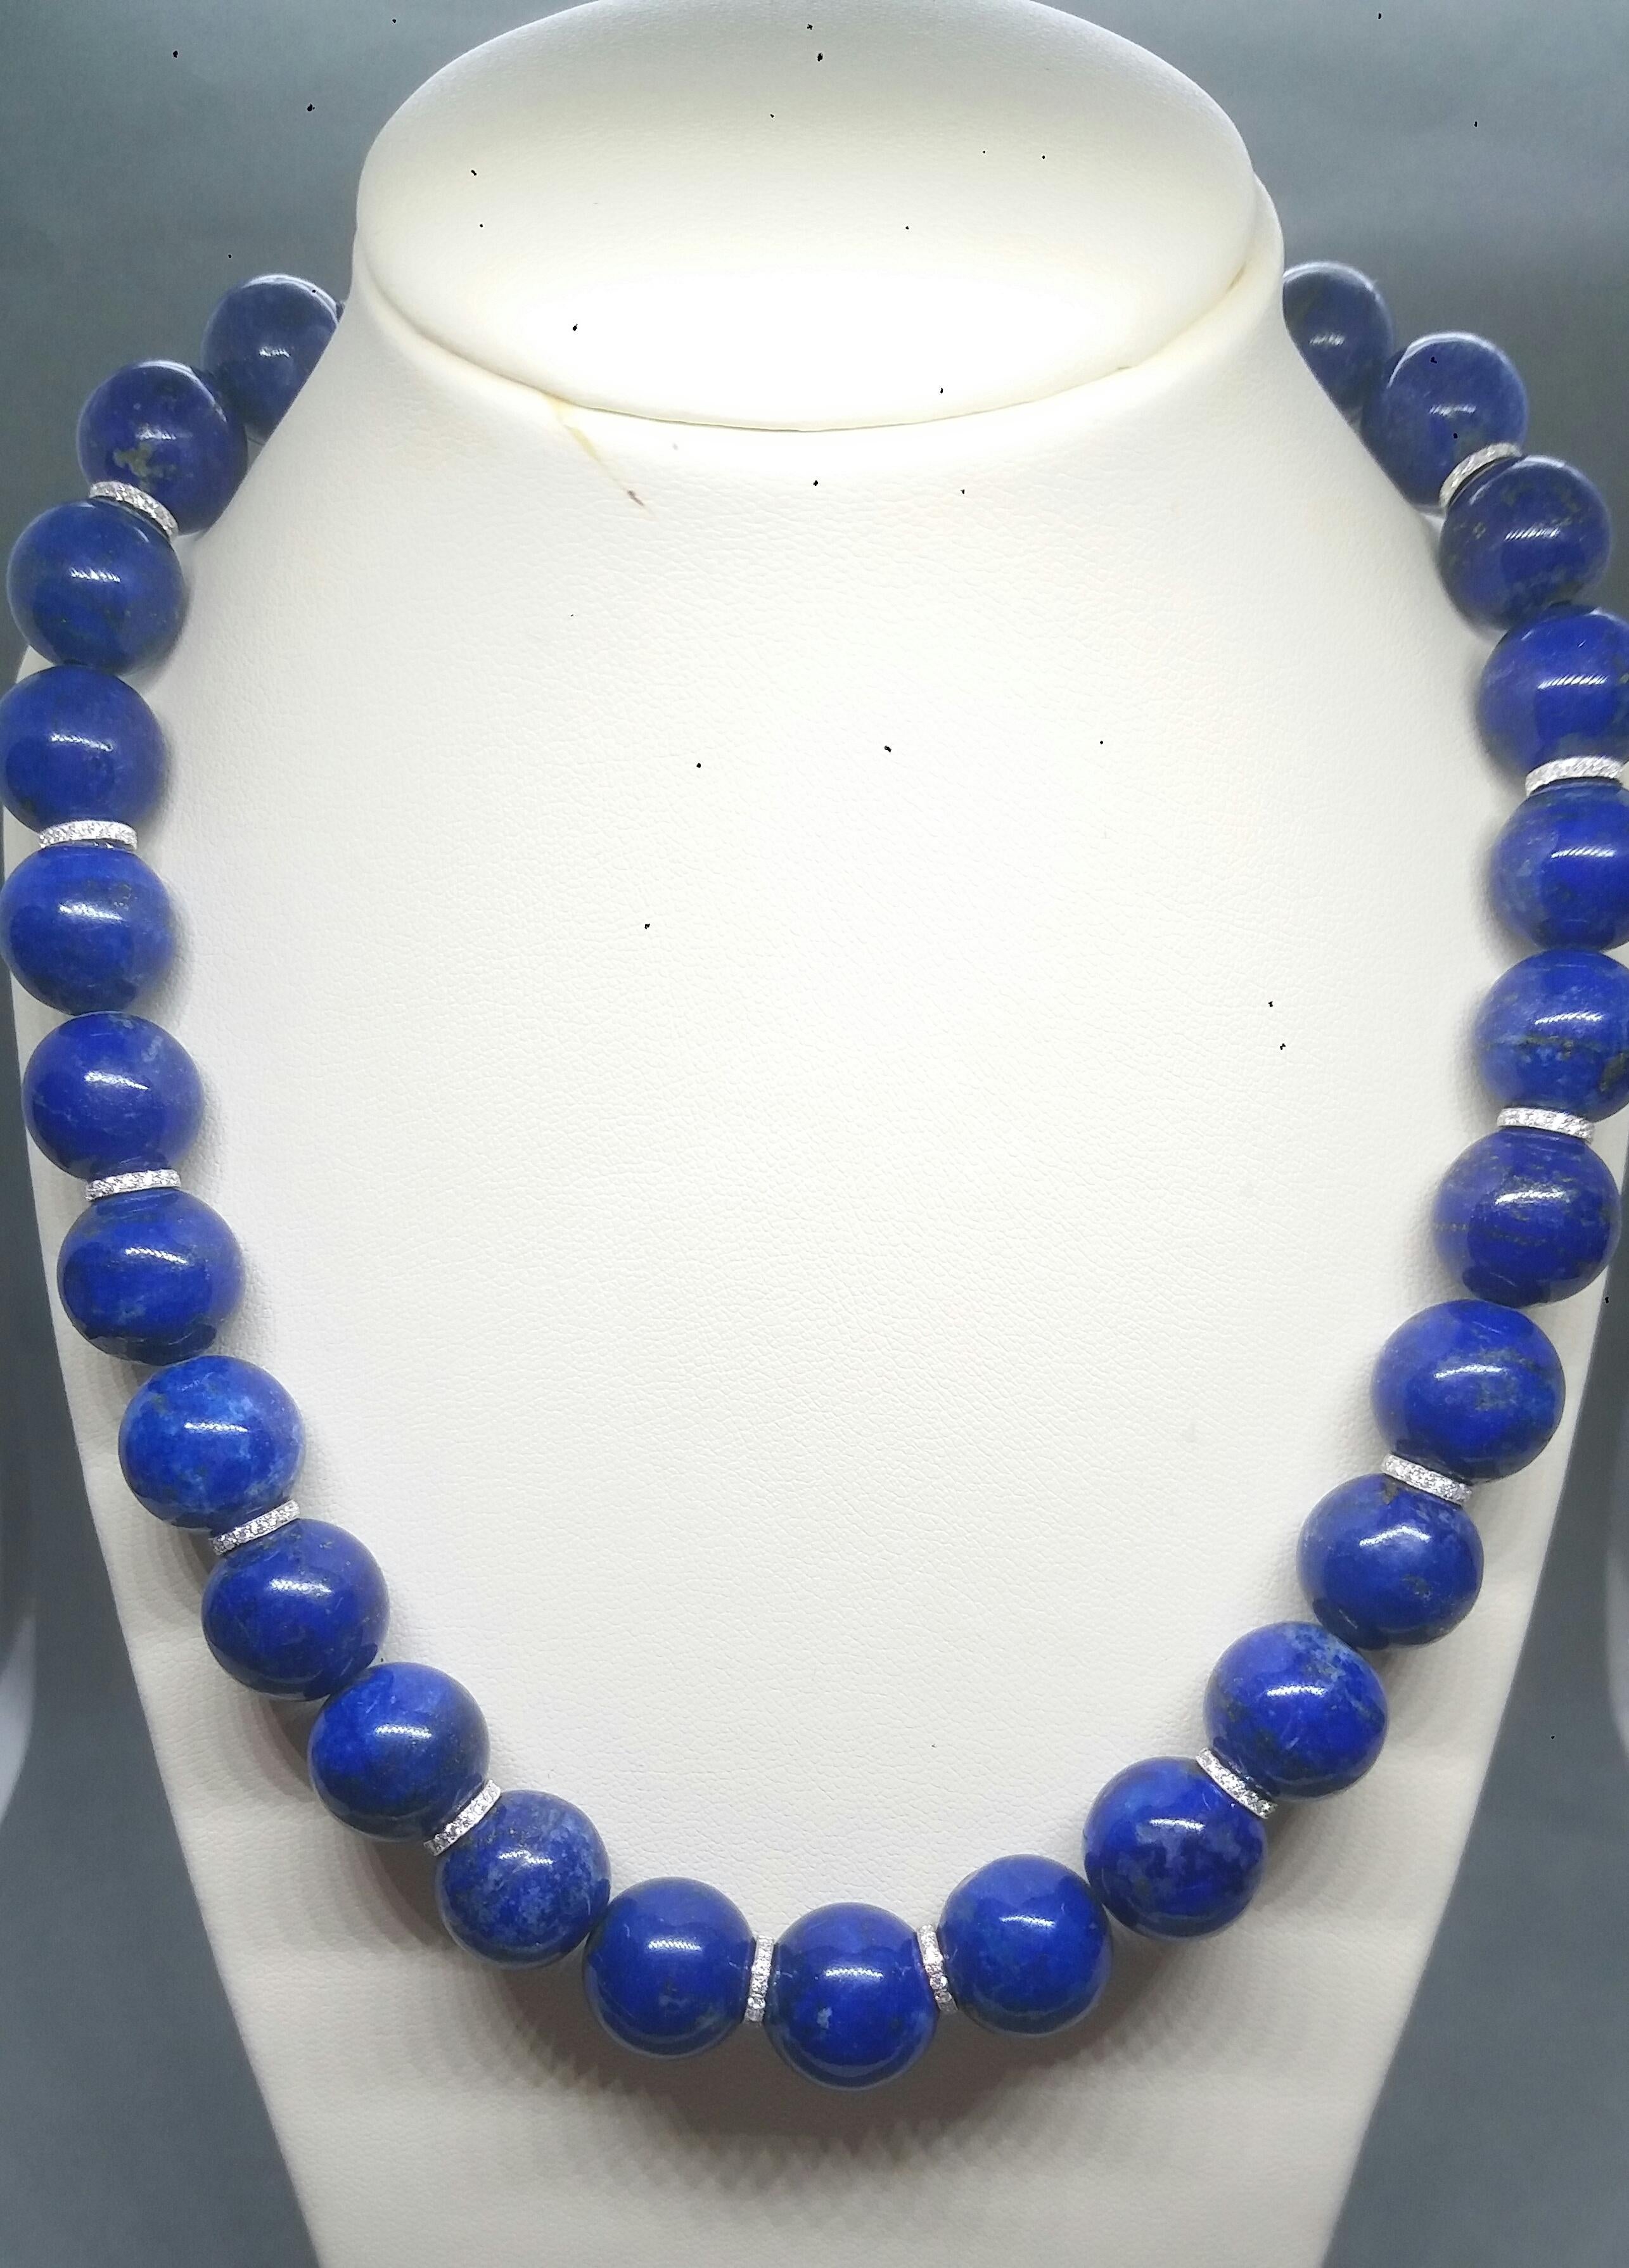 Women's Natural Lapis Lazuli Beads Necklace 14 K White Gold Diamonds Spacers And Clasp For Sale